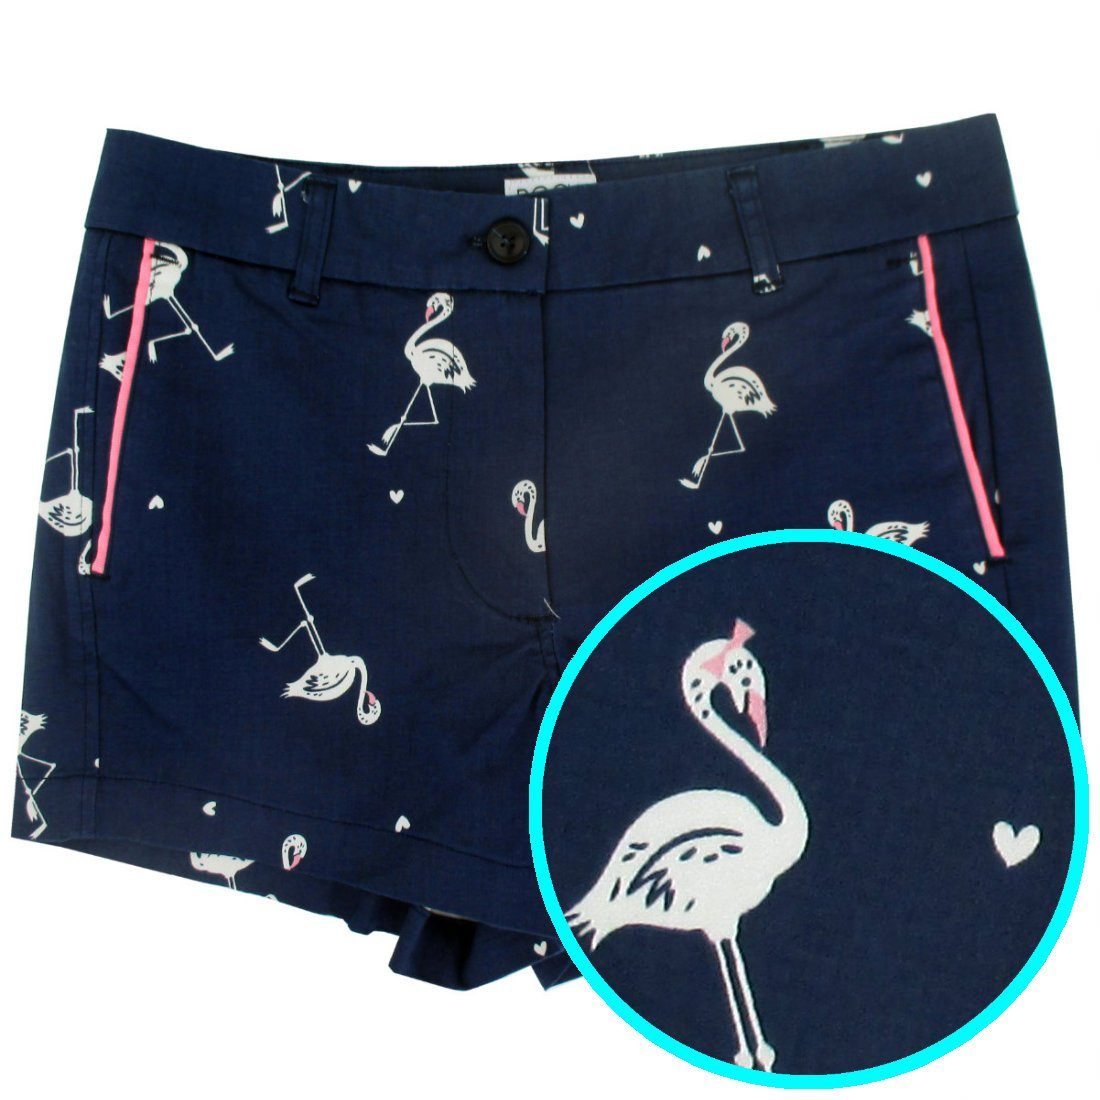 Unique Womenswear Casual Flat Front Chinos Bermuda Shorts for Women with Flamingos All Over Print